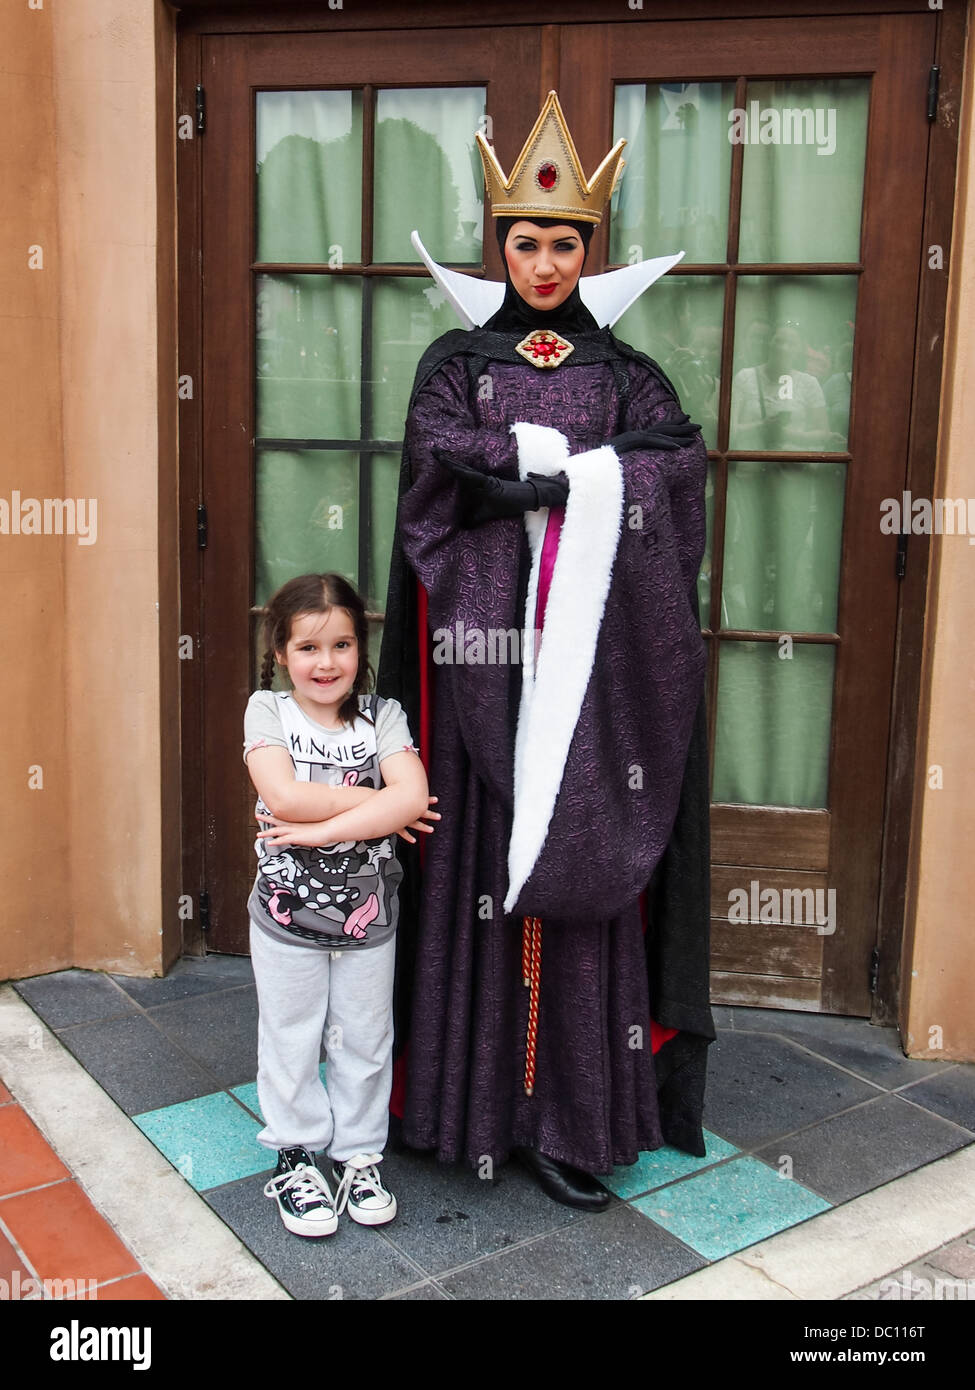 The evil queen Grimhilde, Snow Whites step mother, poses with a young girl at Disneyland Paris Stock Photo